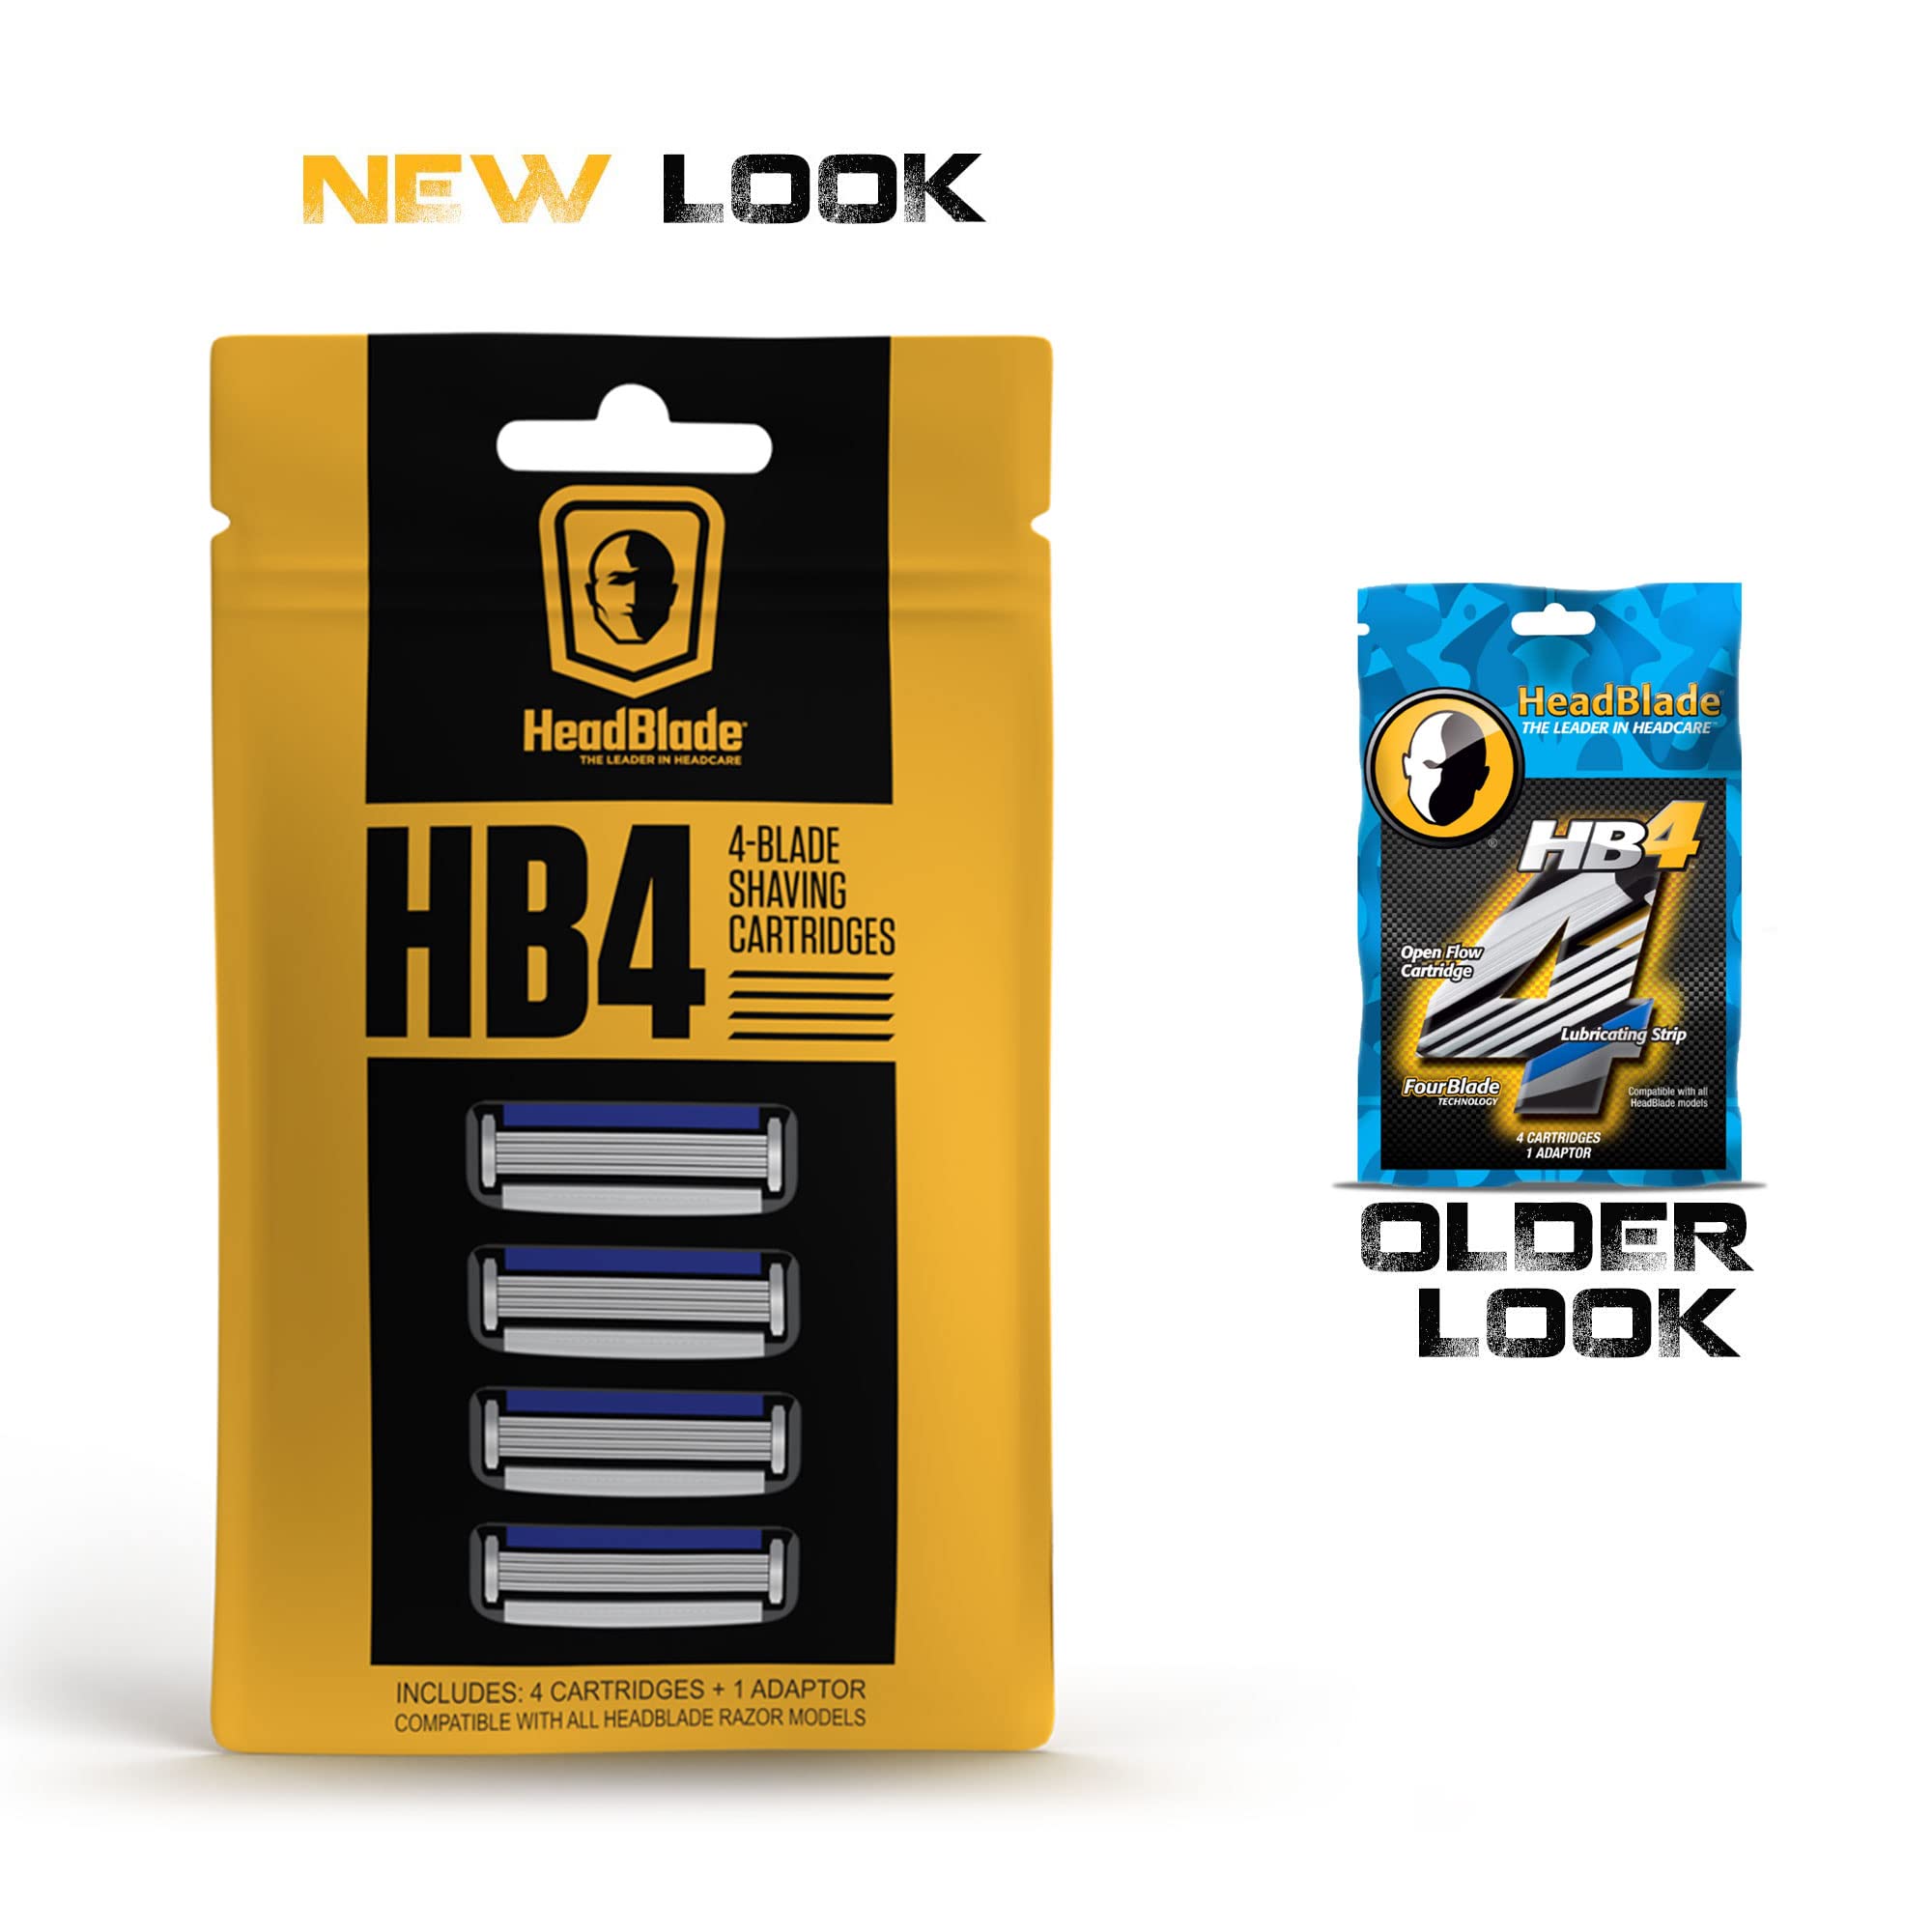 HeadBlade HB4 Refill Razor Blade Cartridges with Lubricating Strip, Four Blade Technology, 4 Count with 1 Adapter - image 2 of 6